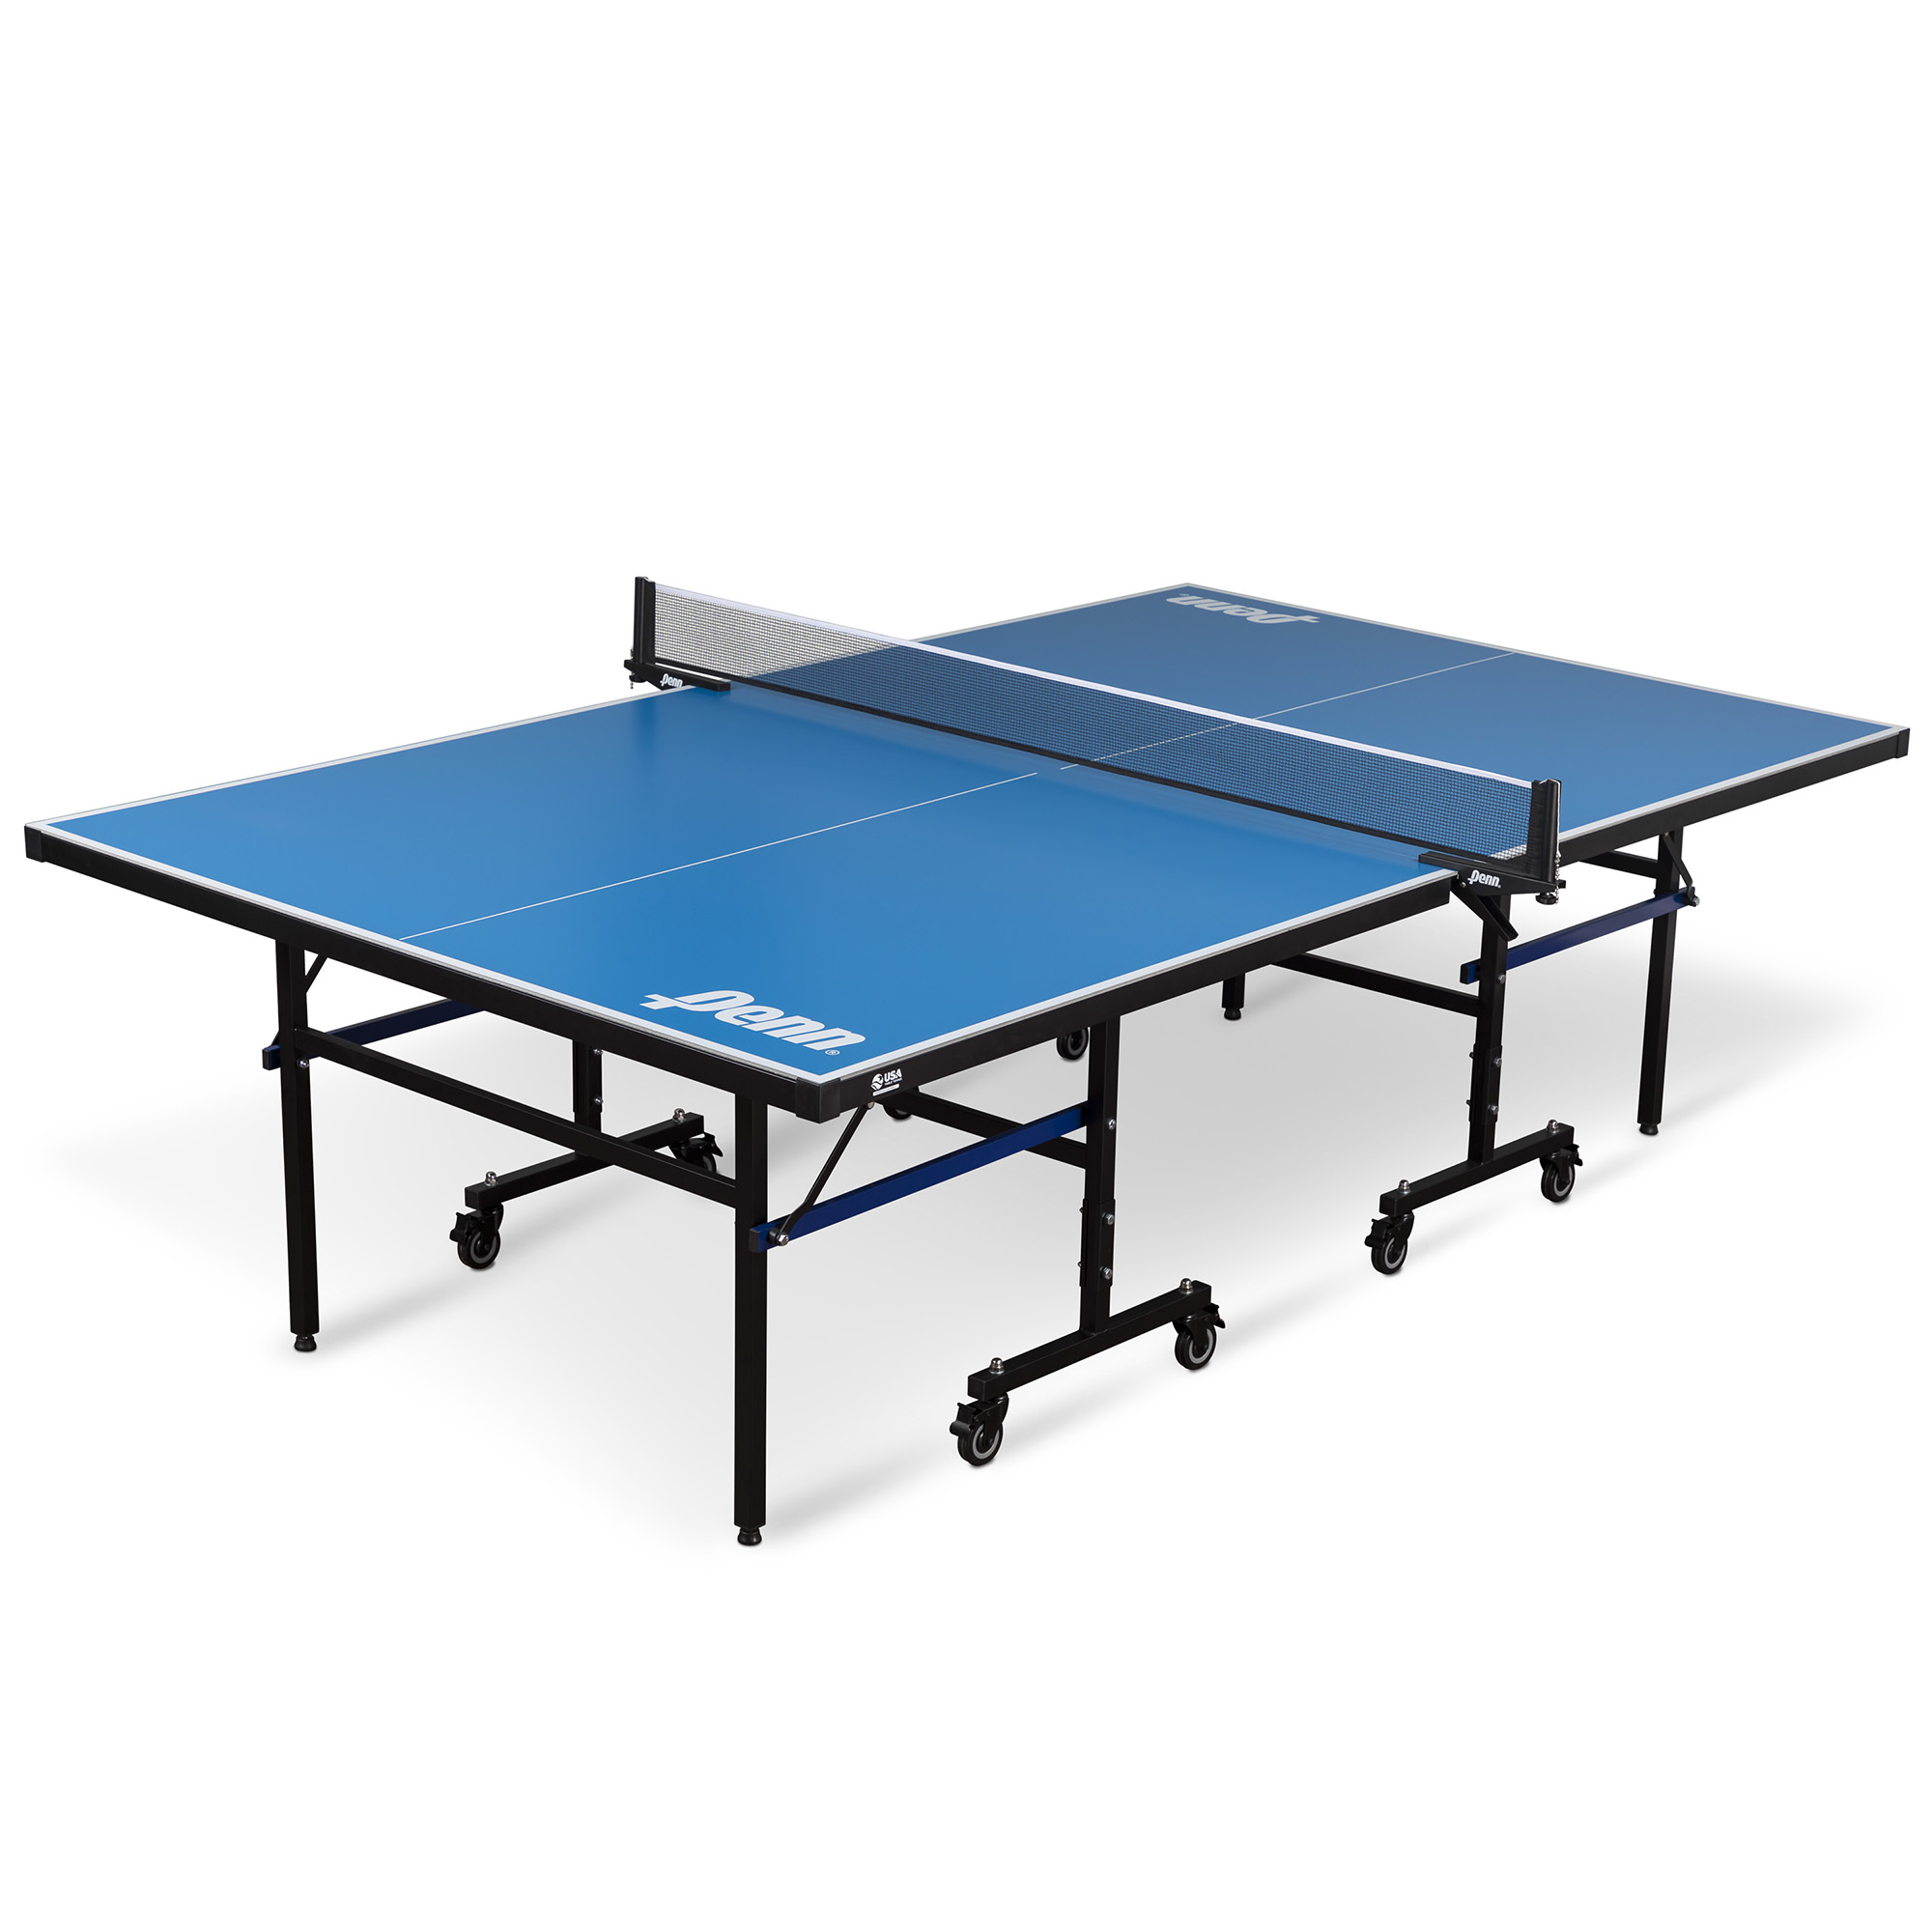 Penn Acadia Outdoor Table Tennis Table with Cover; 10 Minute Setup - image 1 of 11